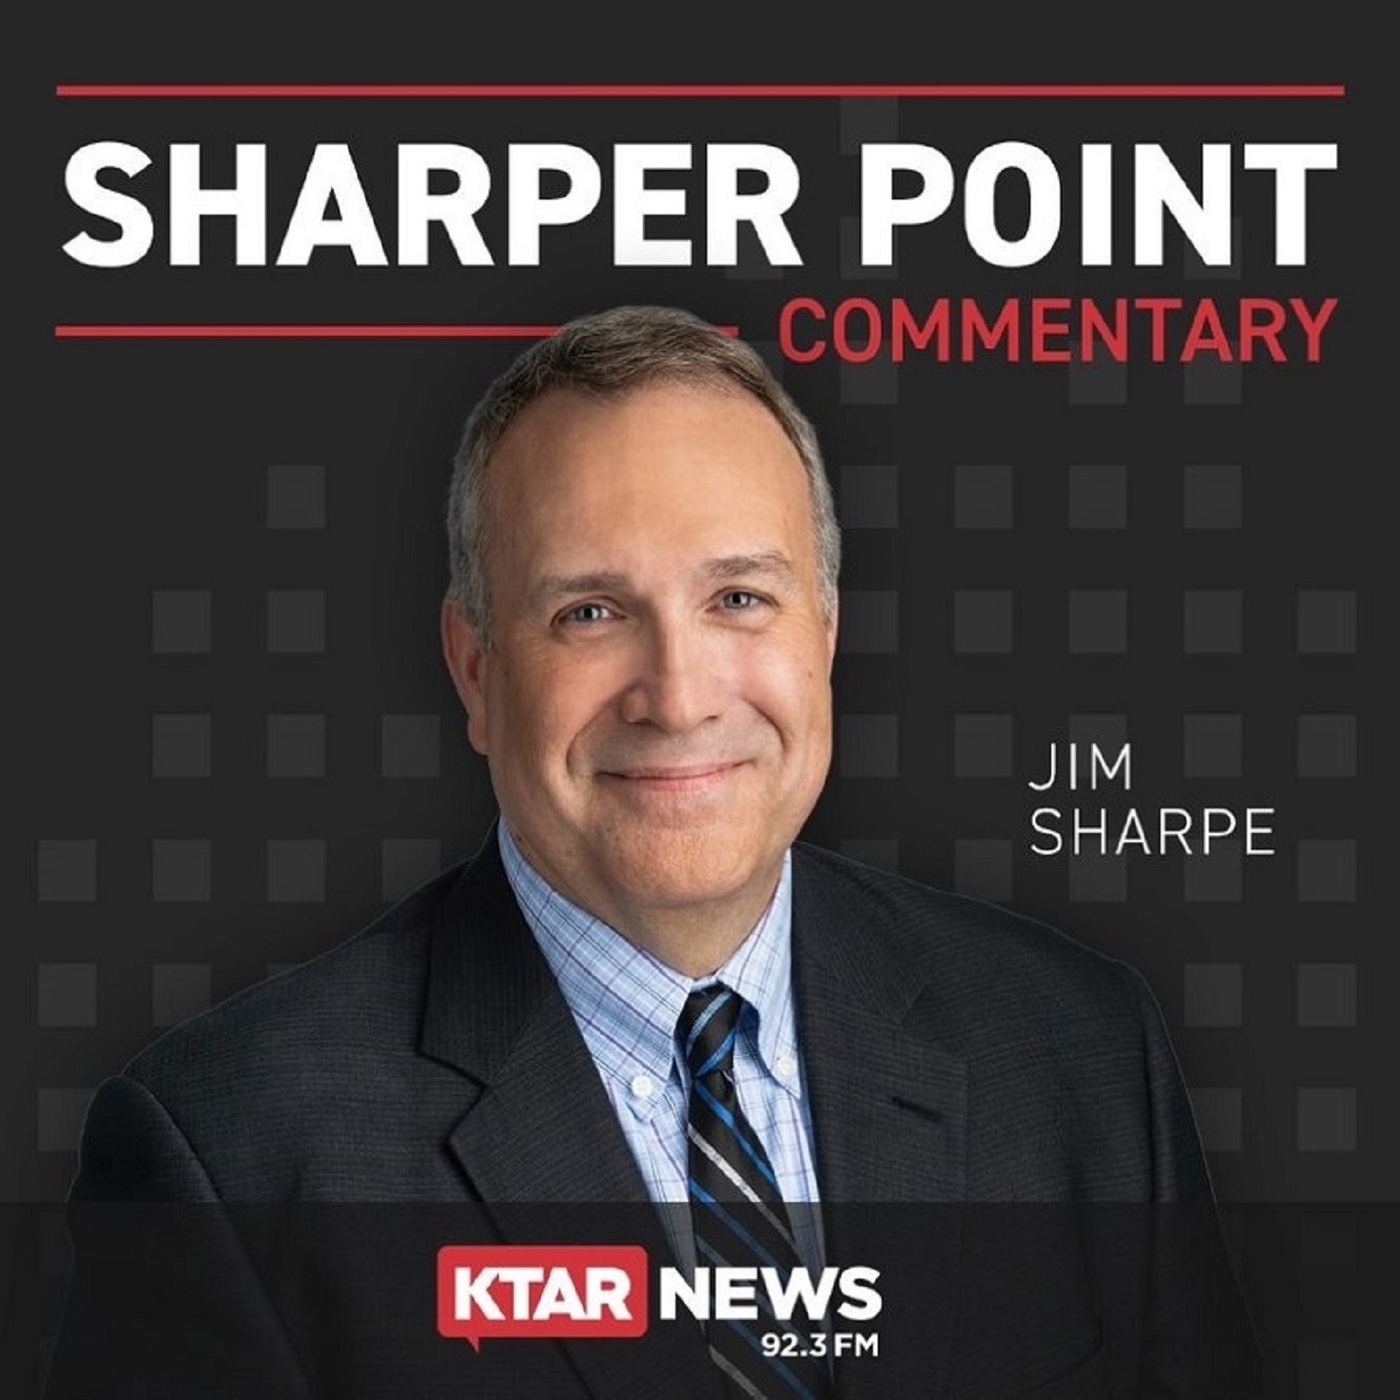 Sharper Point Commentary: What is Mayorkas up to?